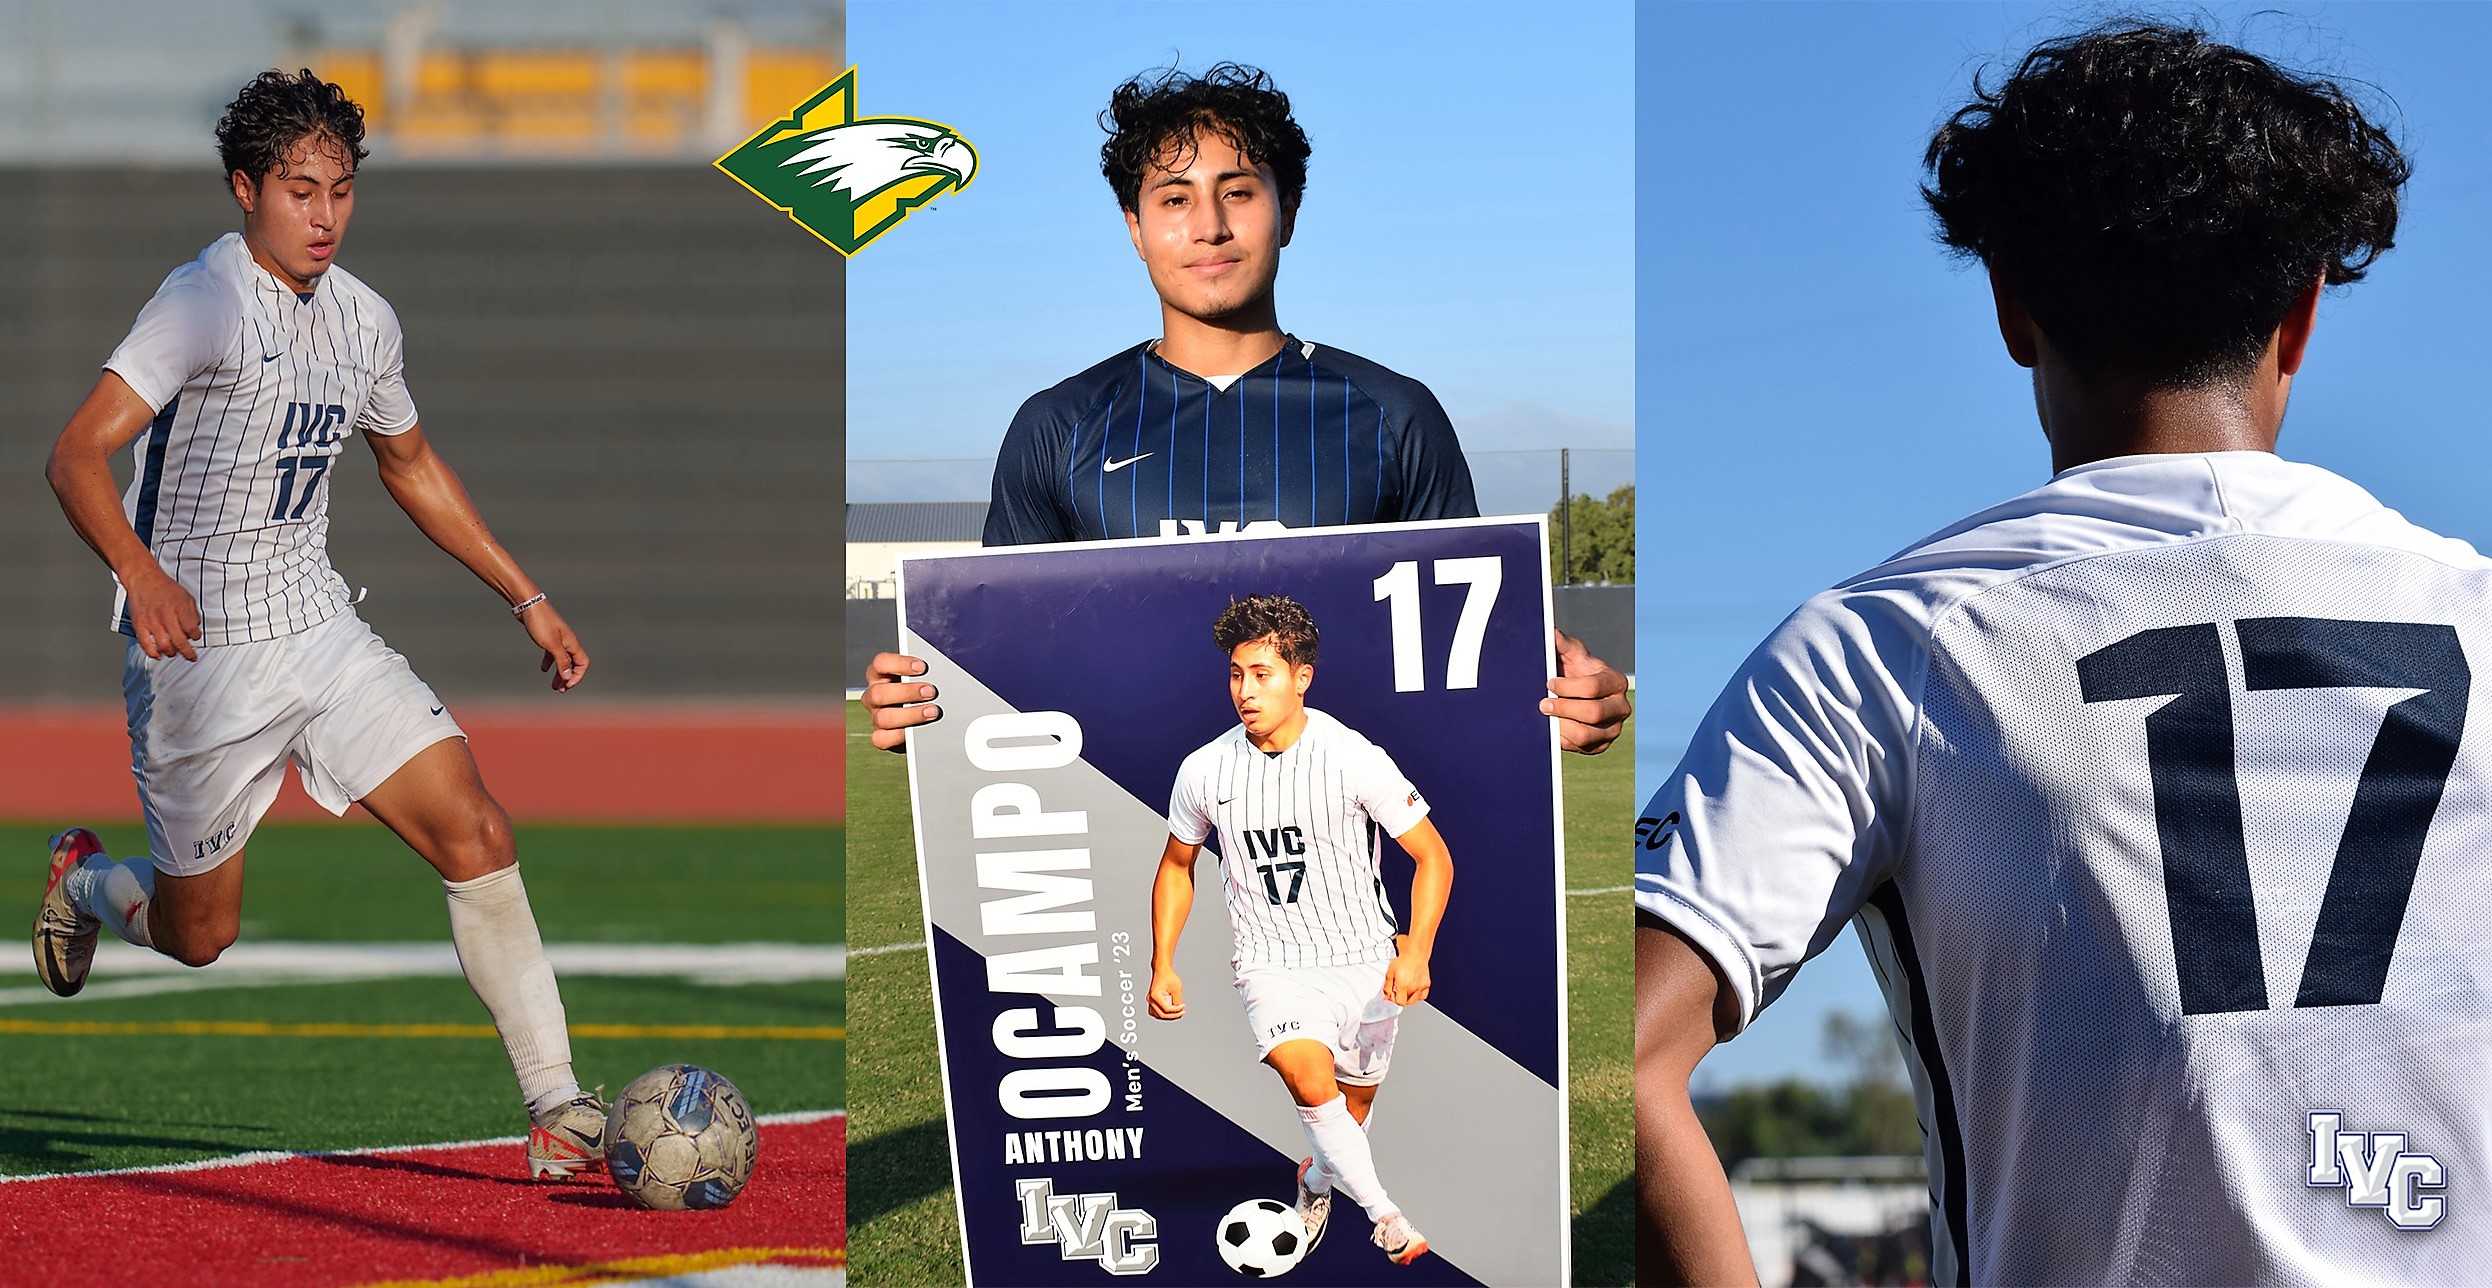 Soccer player Anthony Ocampo commits to Concordia University